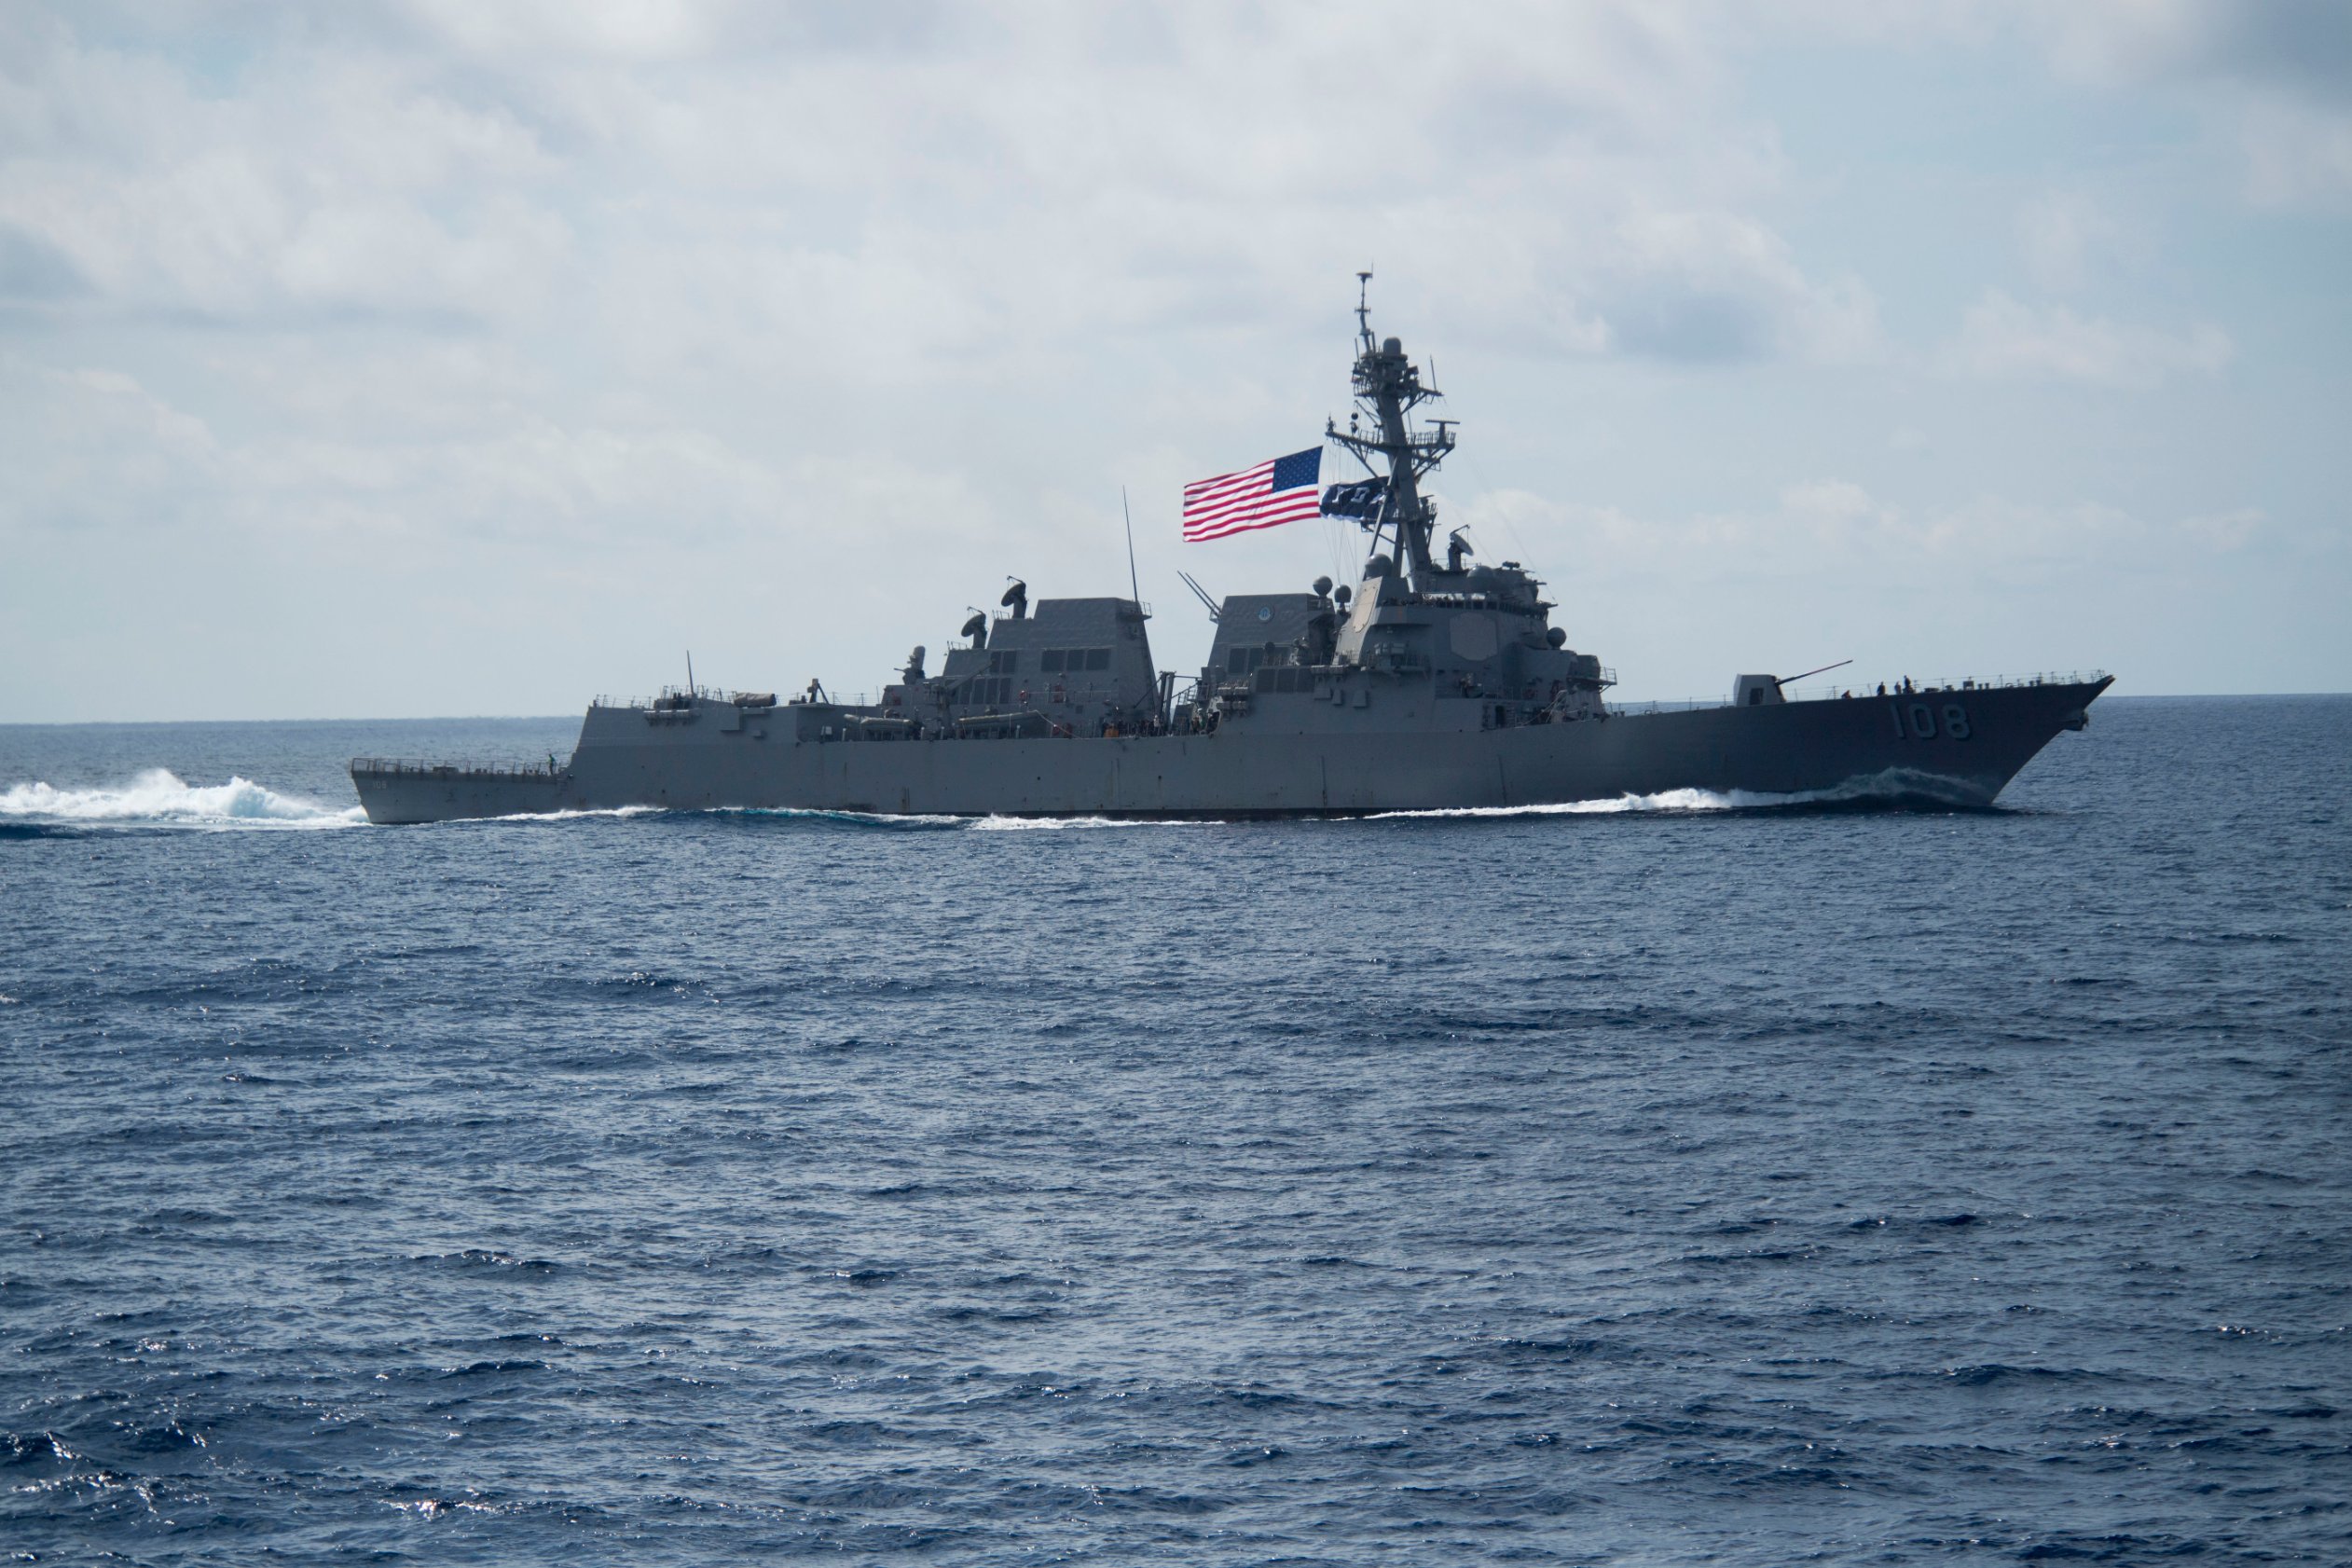 China says US warship 'trespassed' into its territorial waters